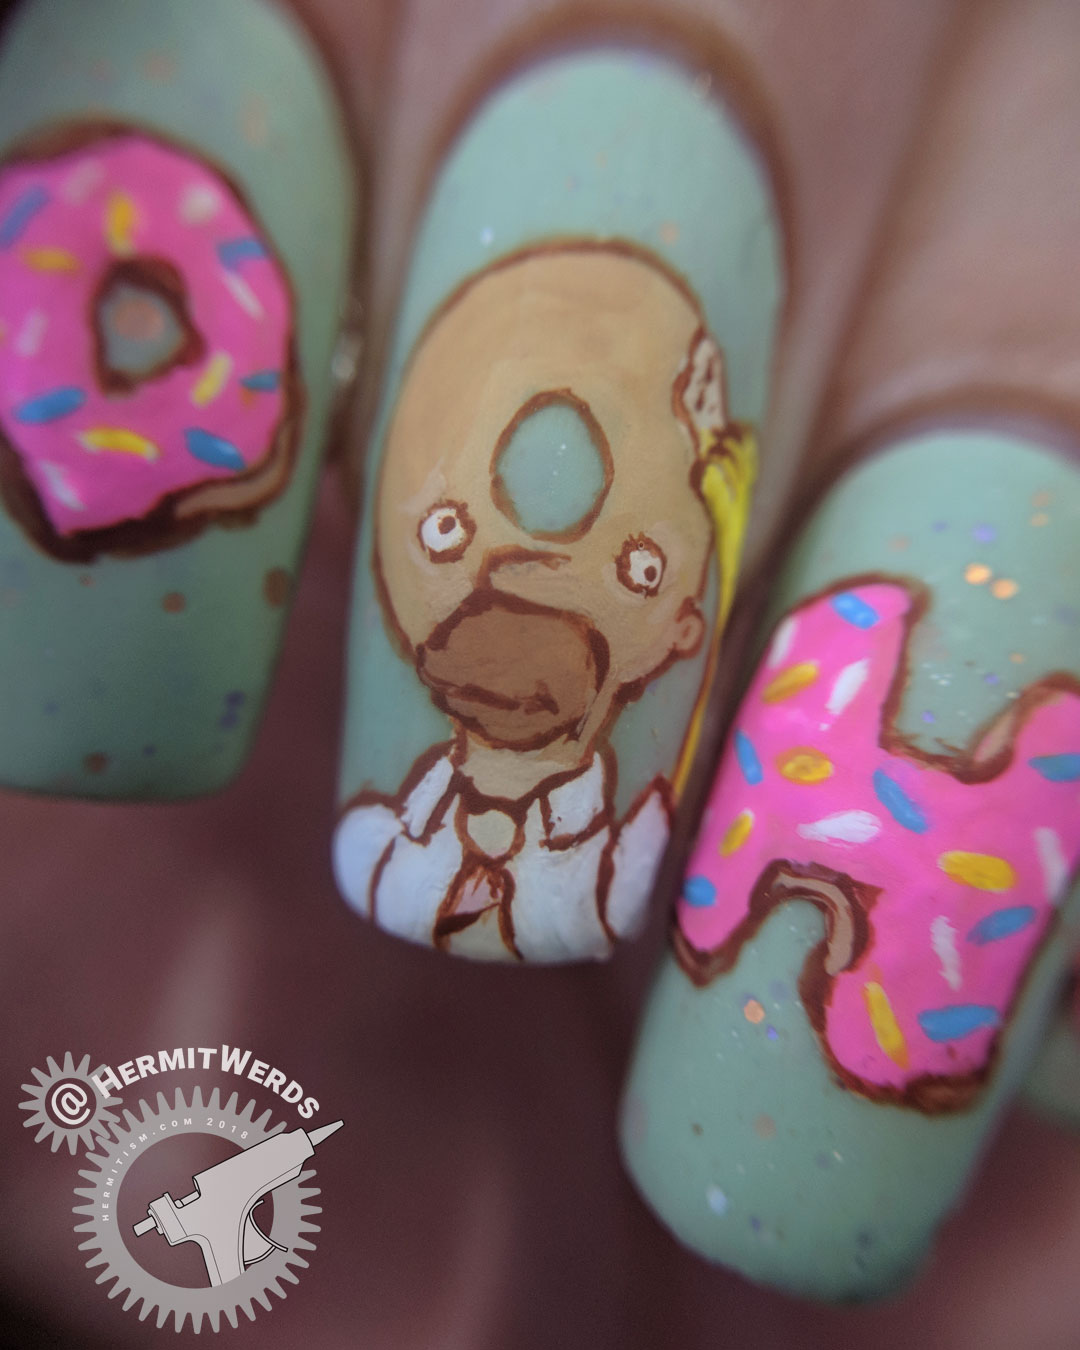 The Simpsons - Homer the Donut (macro) - Hermit Werds - freehand nail art of Homer Simpson turned into a donut head with his catchprase "Doh"